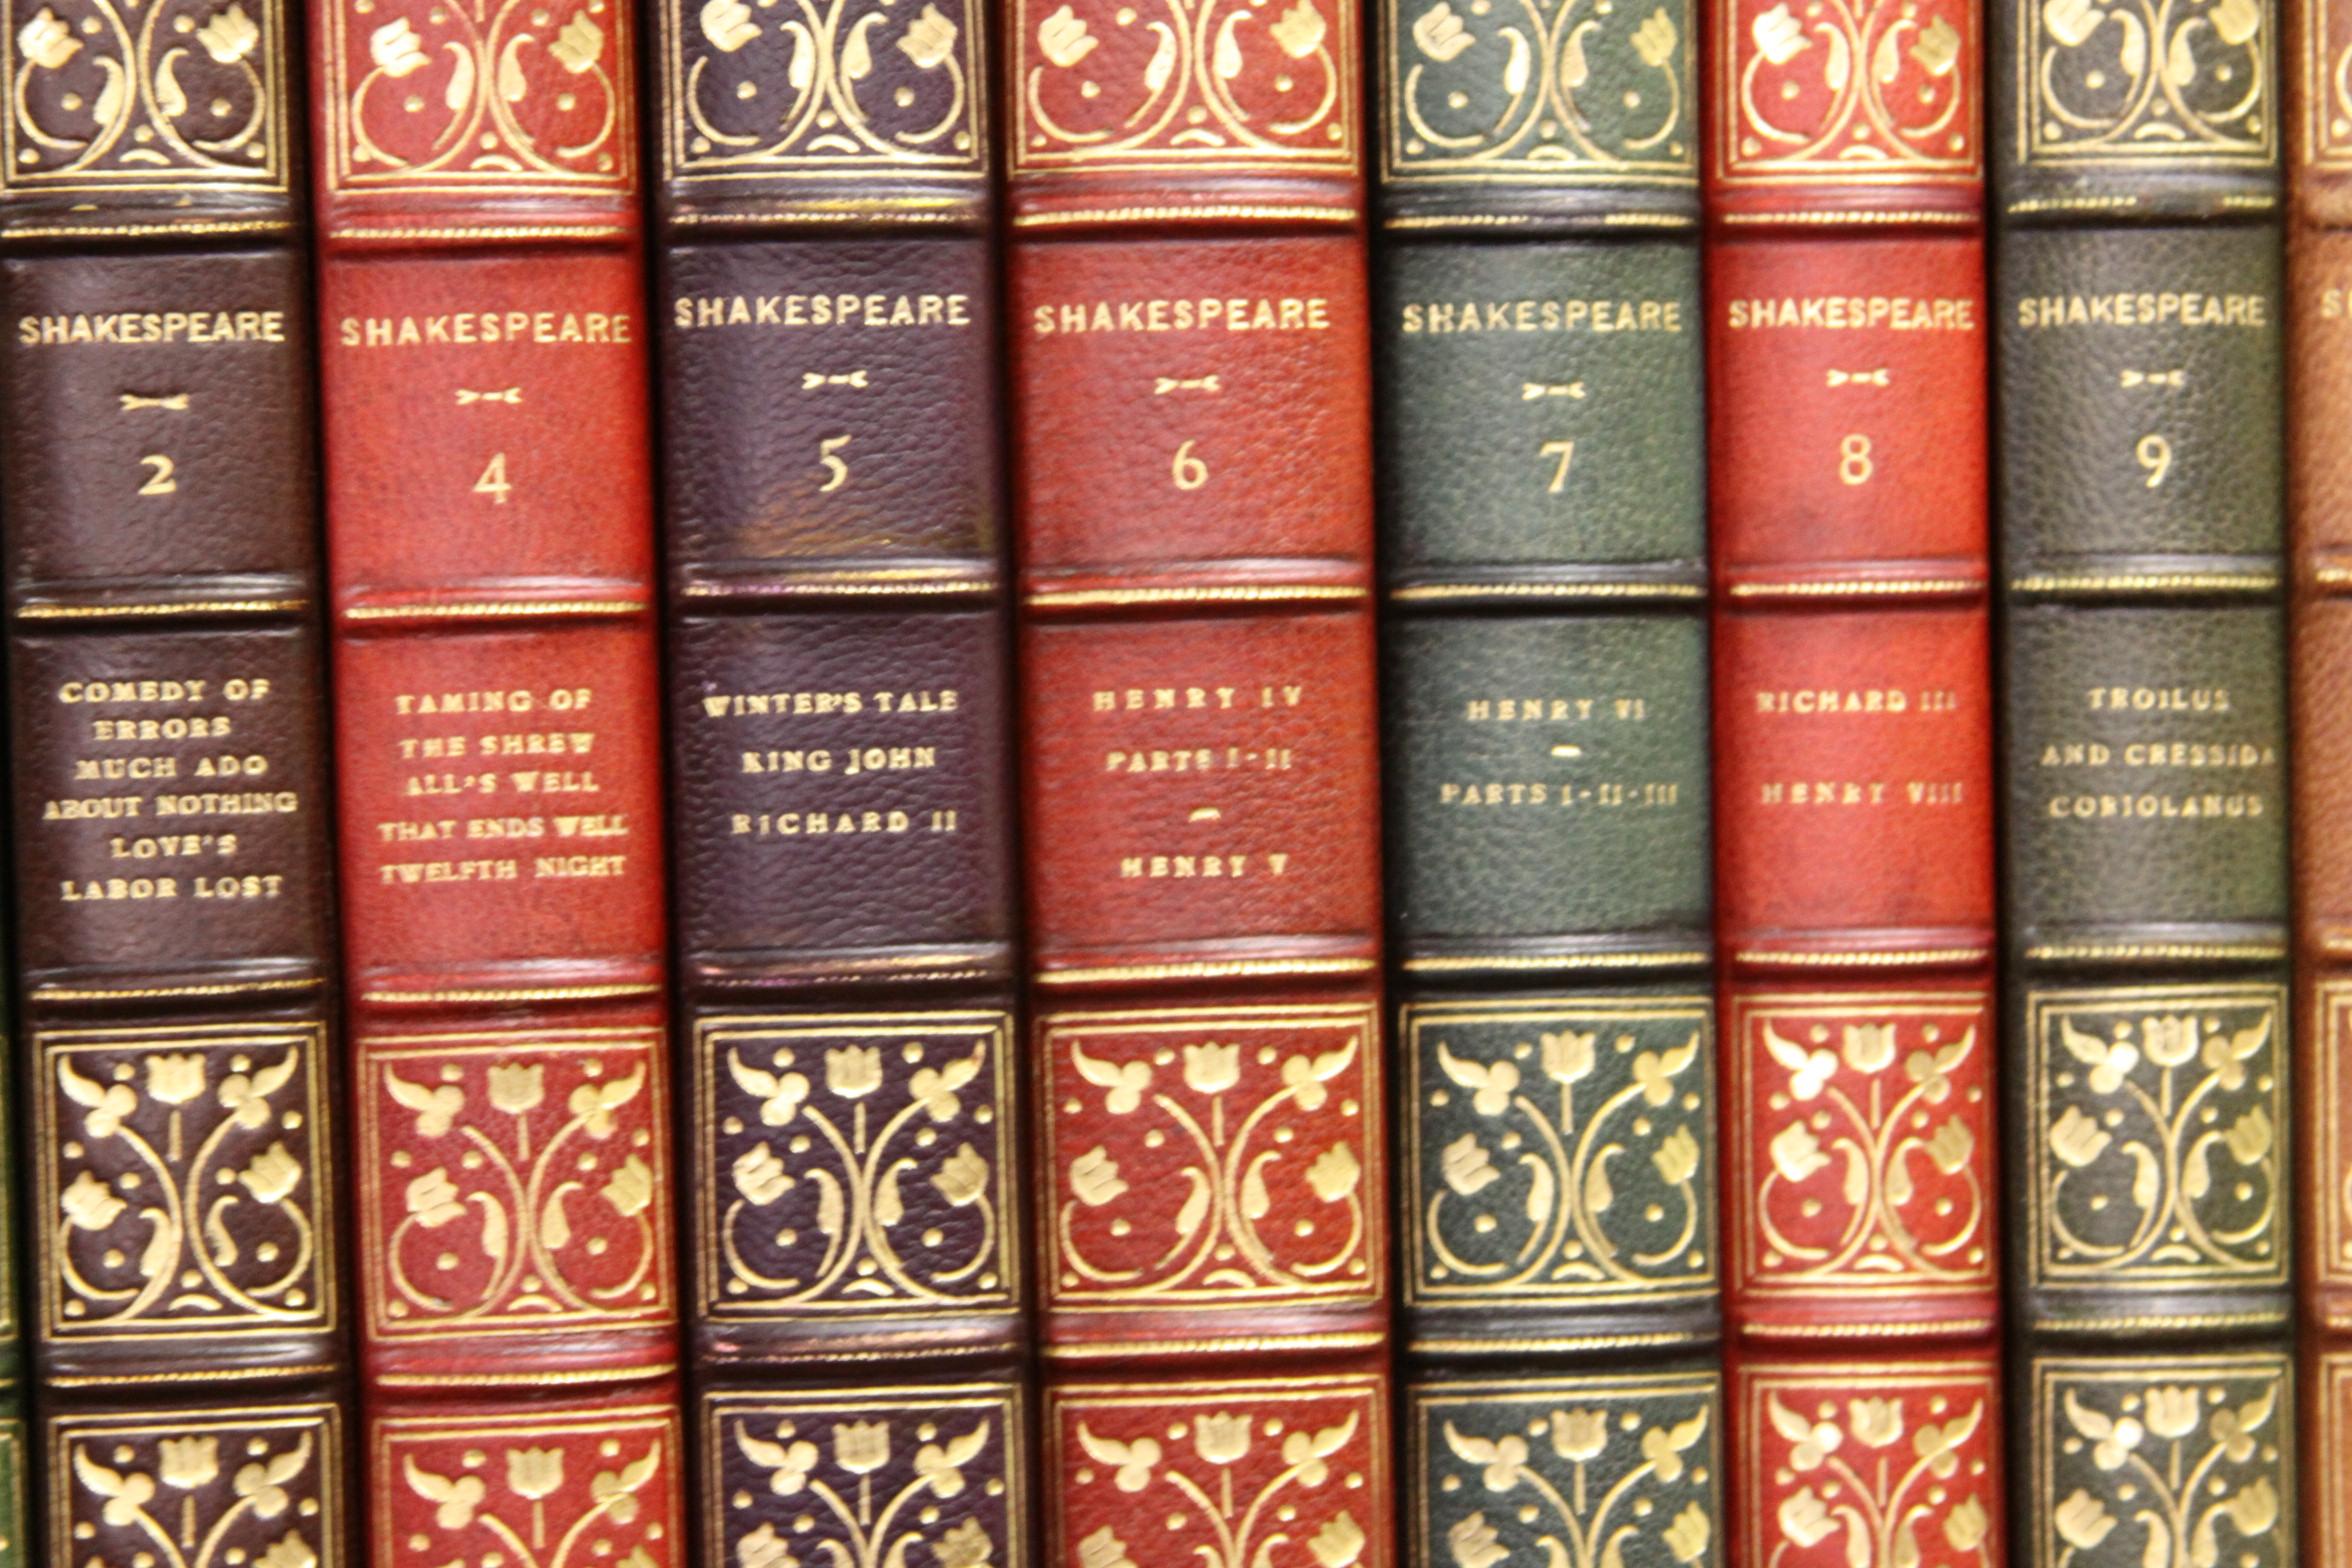 20th Century Books, The Works of William Shakespeare, Antique Leather-Bound Collections